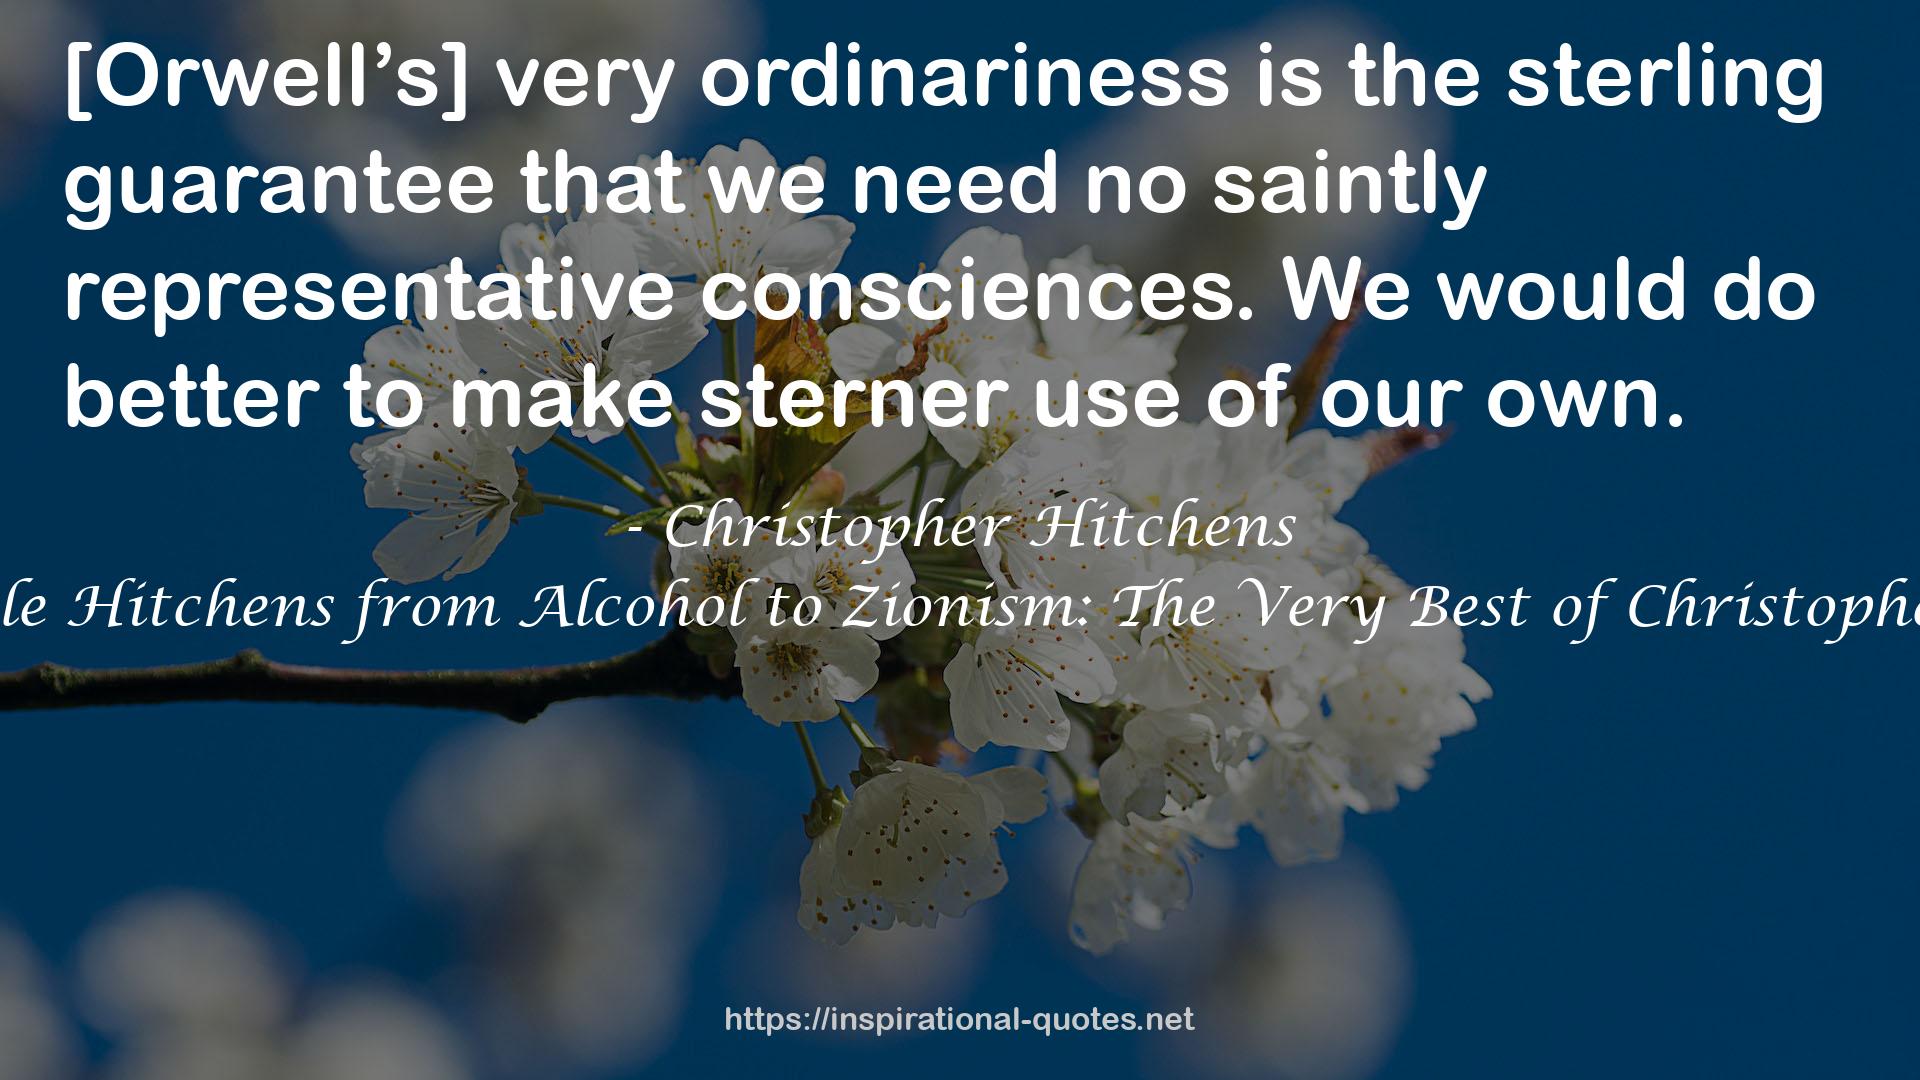 The Quotable Hitchens from Alcohol to Zionism: The Very Best of Christopher Hitchens QUOTES